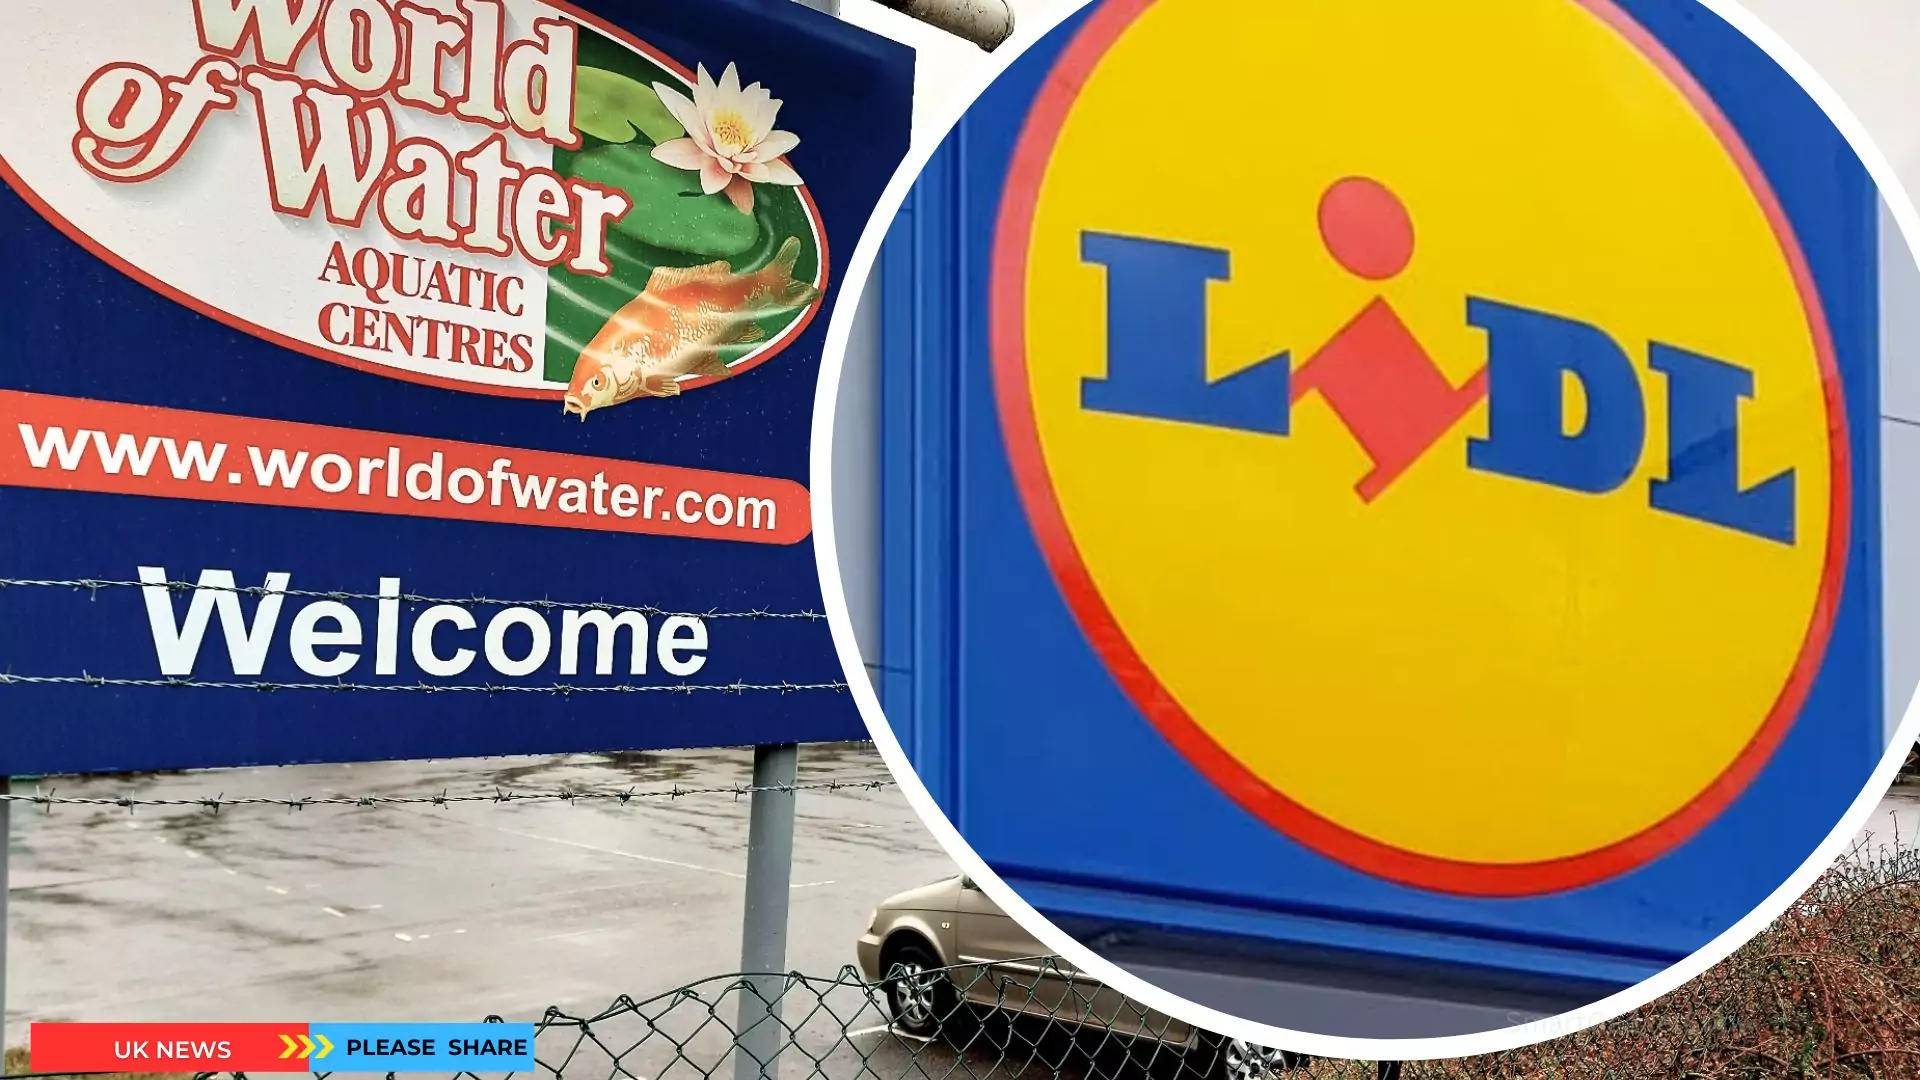 New Lidl at M25 junction plans approved despite A41 turning fears